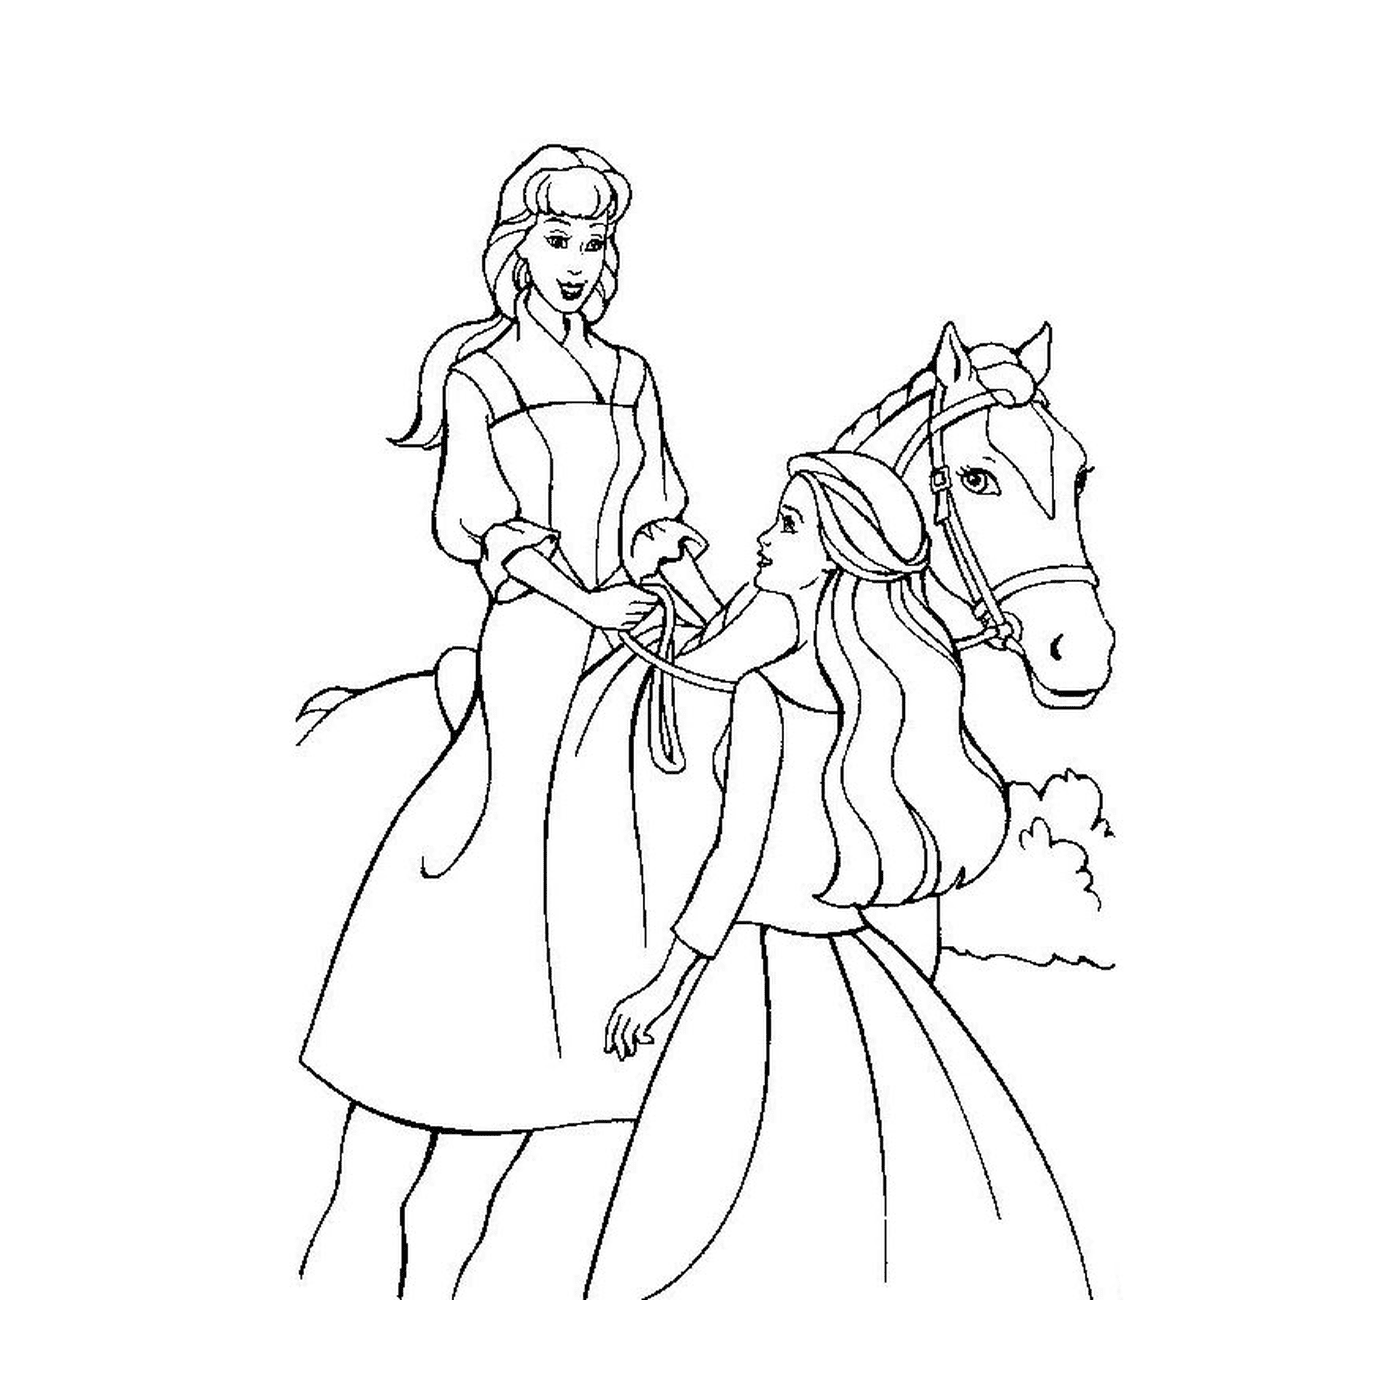  Barbie horse with two young women on horseback 